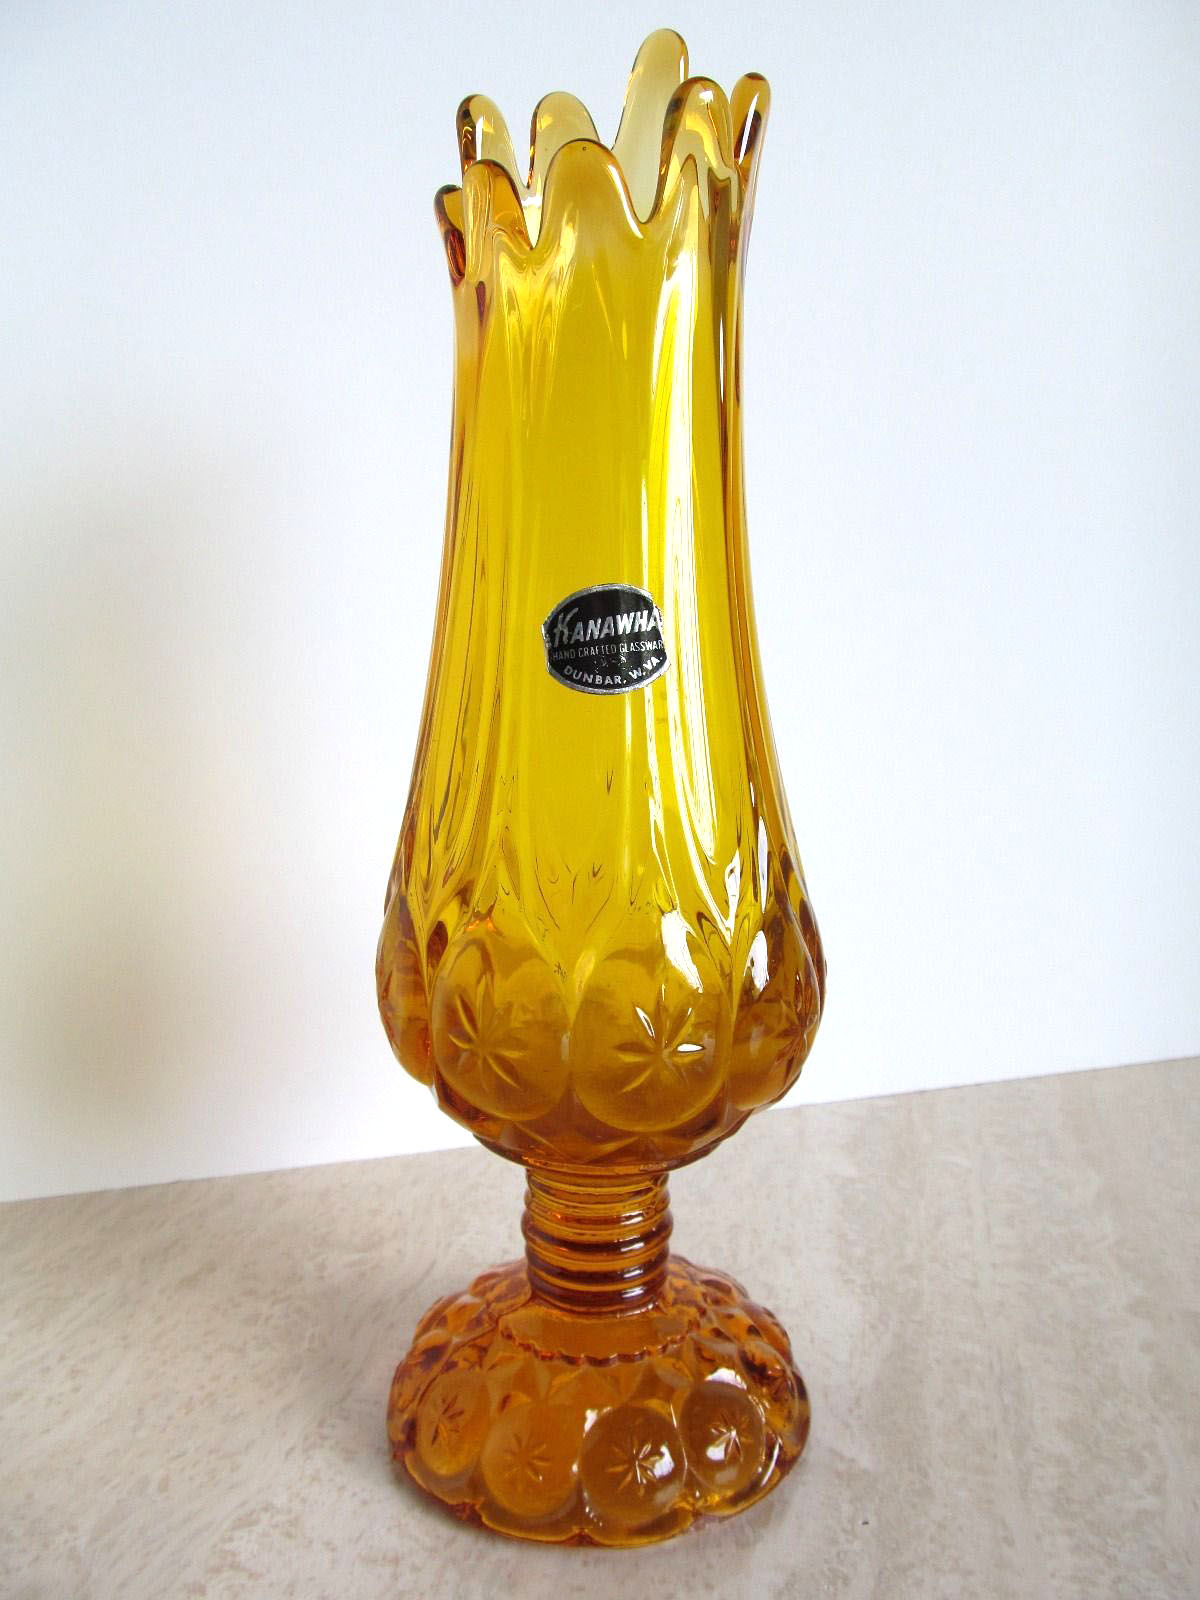 Vintage KAHAWHA Hand Crafted Glass Pedestal Amber Swung Stretch Vase